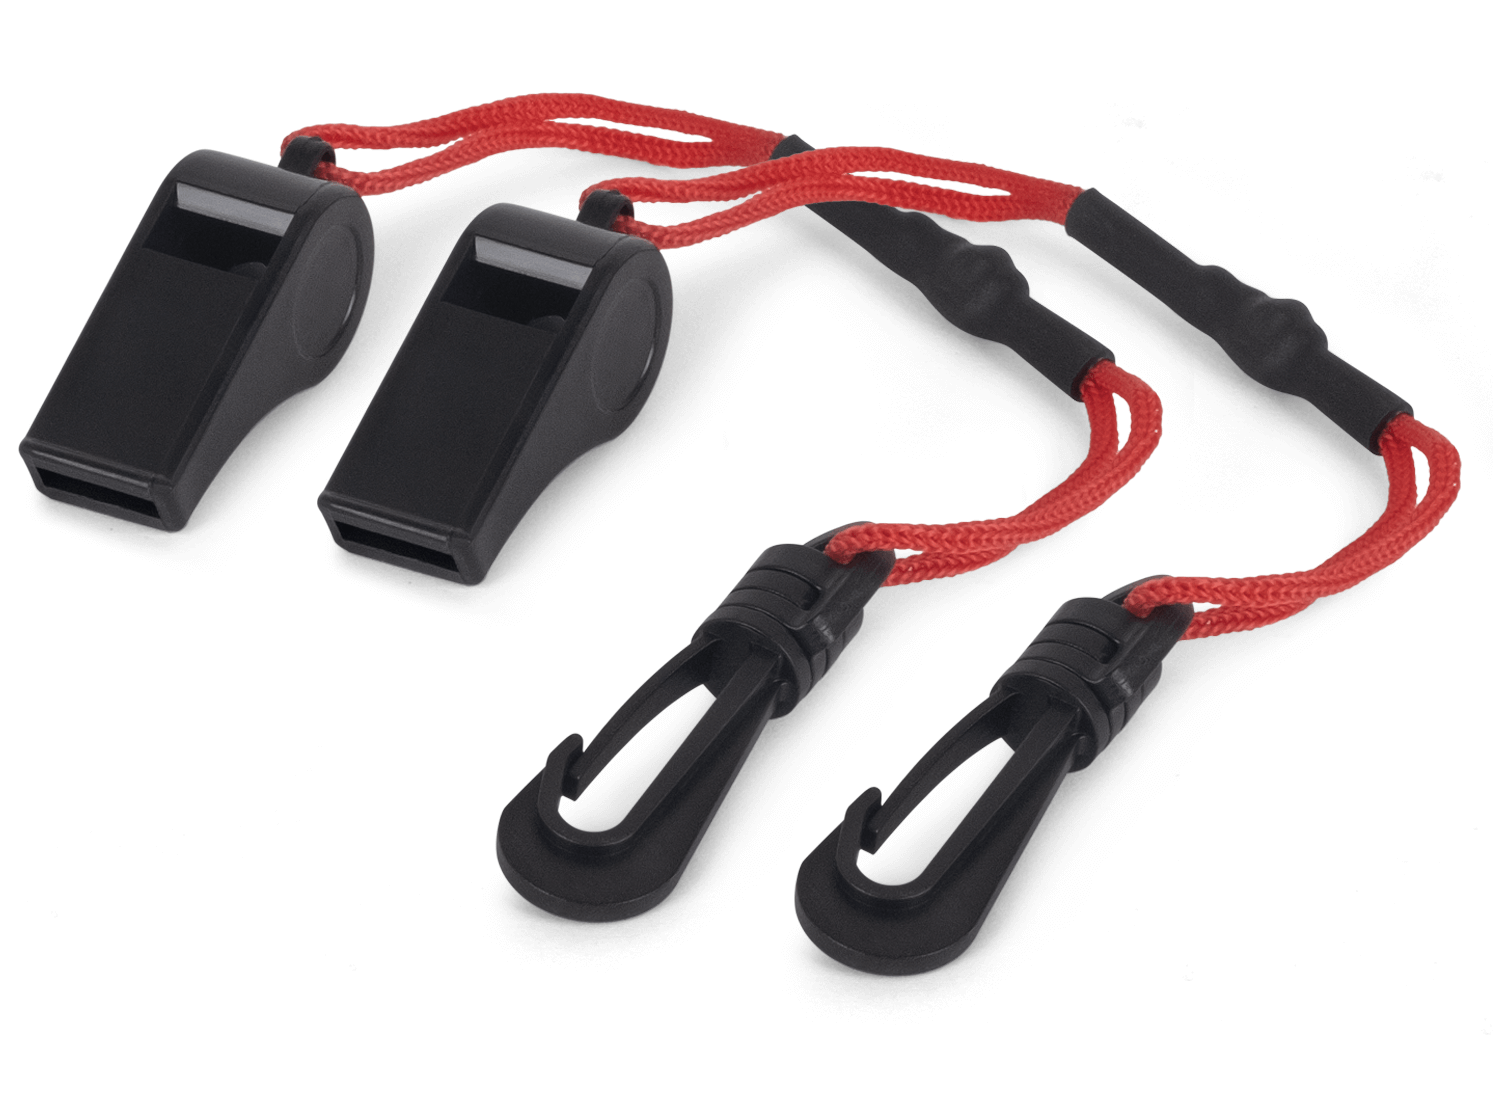 Two SUP emergency whistles in black